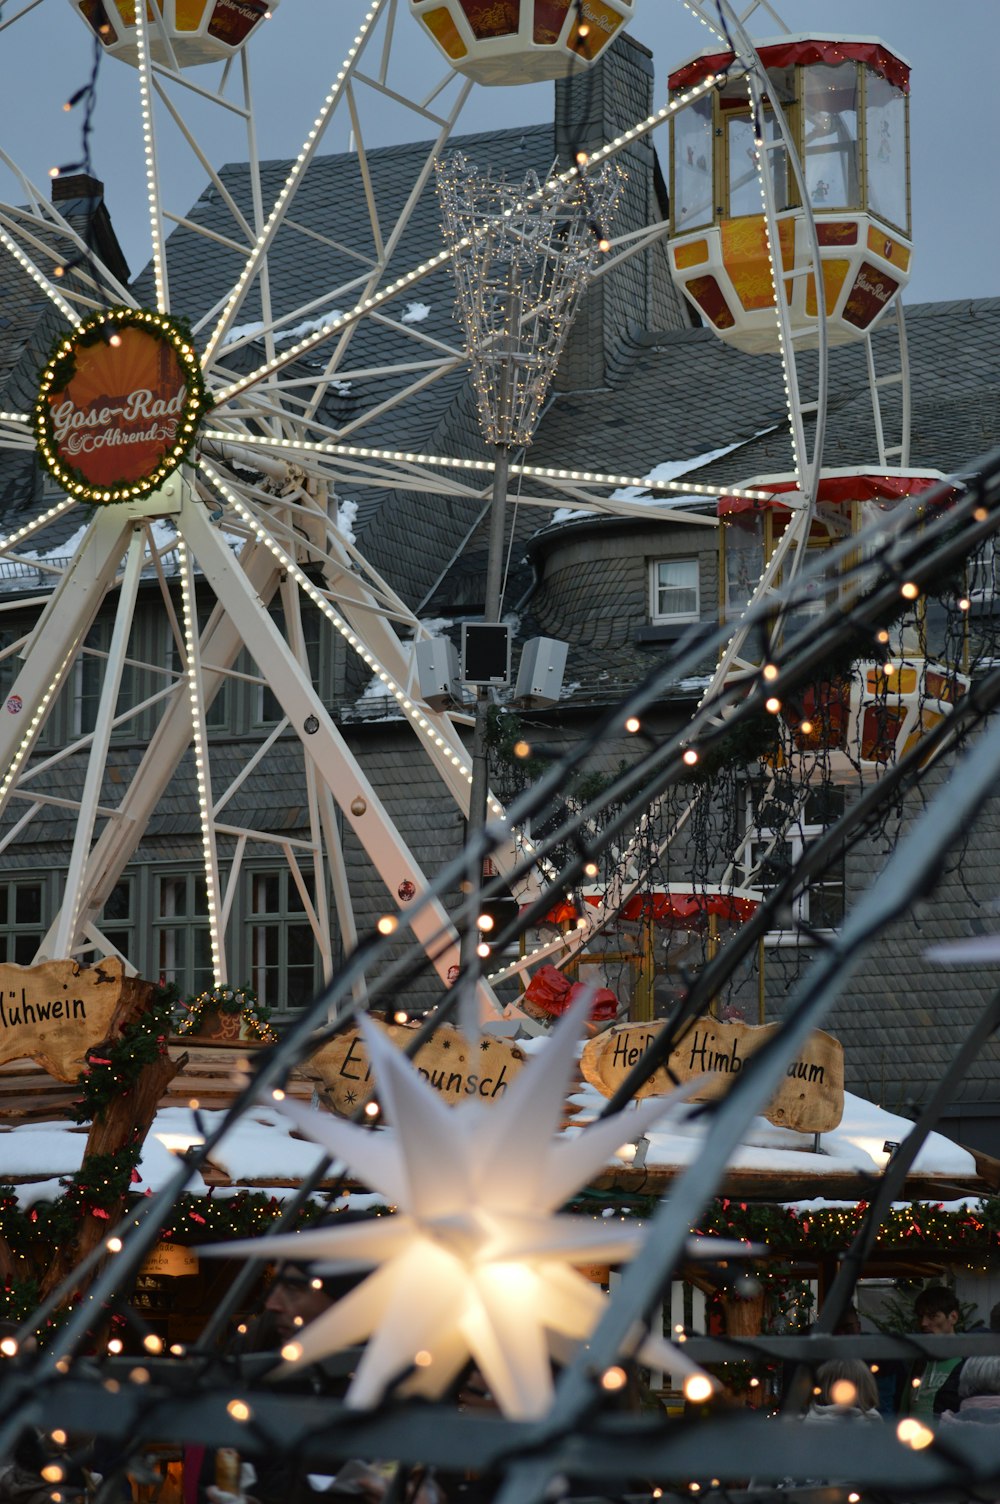 a ferris wheel with lights and decorations around it